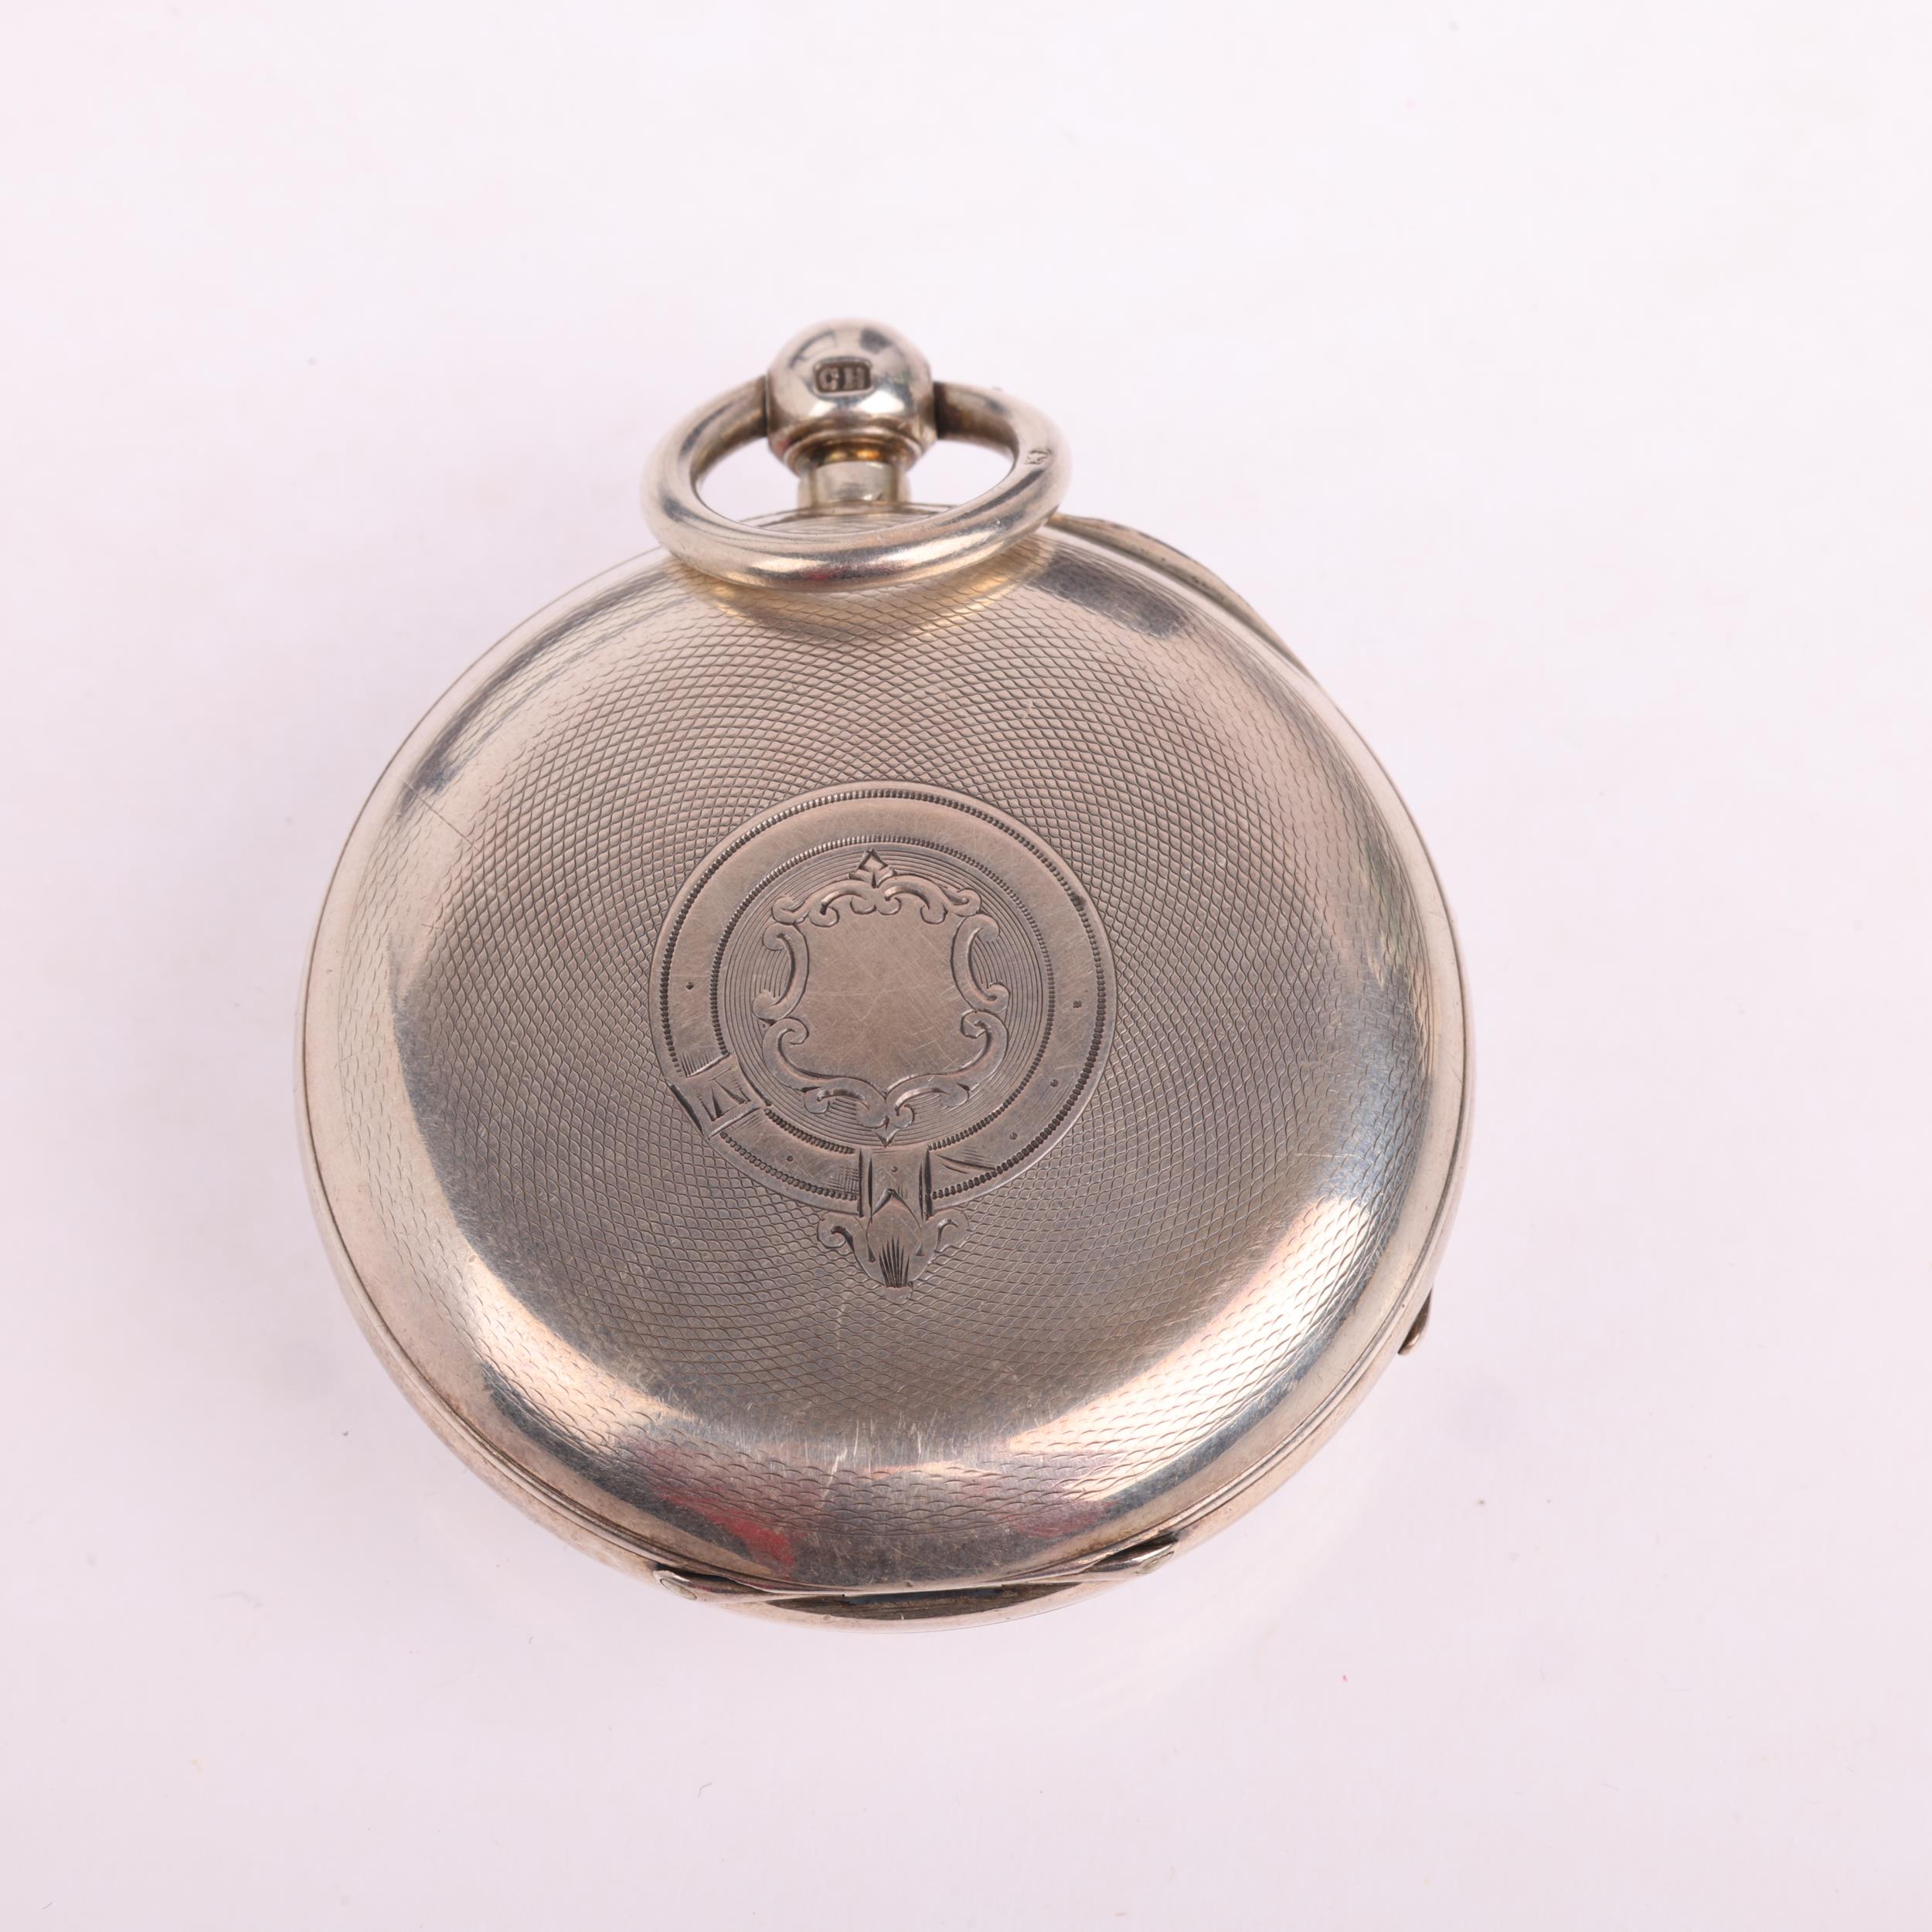 J W BENSON - a late 19th century silver open-face key-wind pocket watch, white enamel dial with - Image 5 of 5